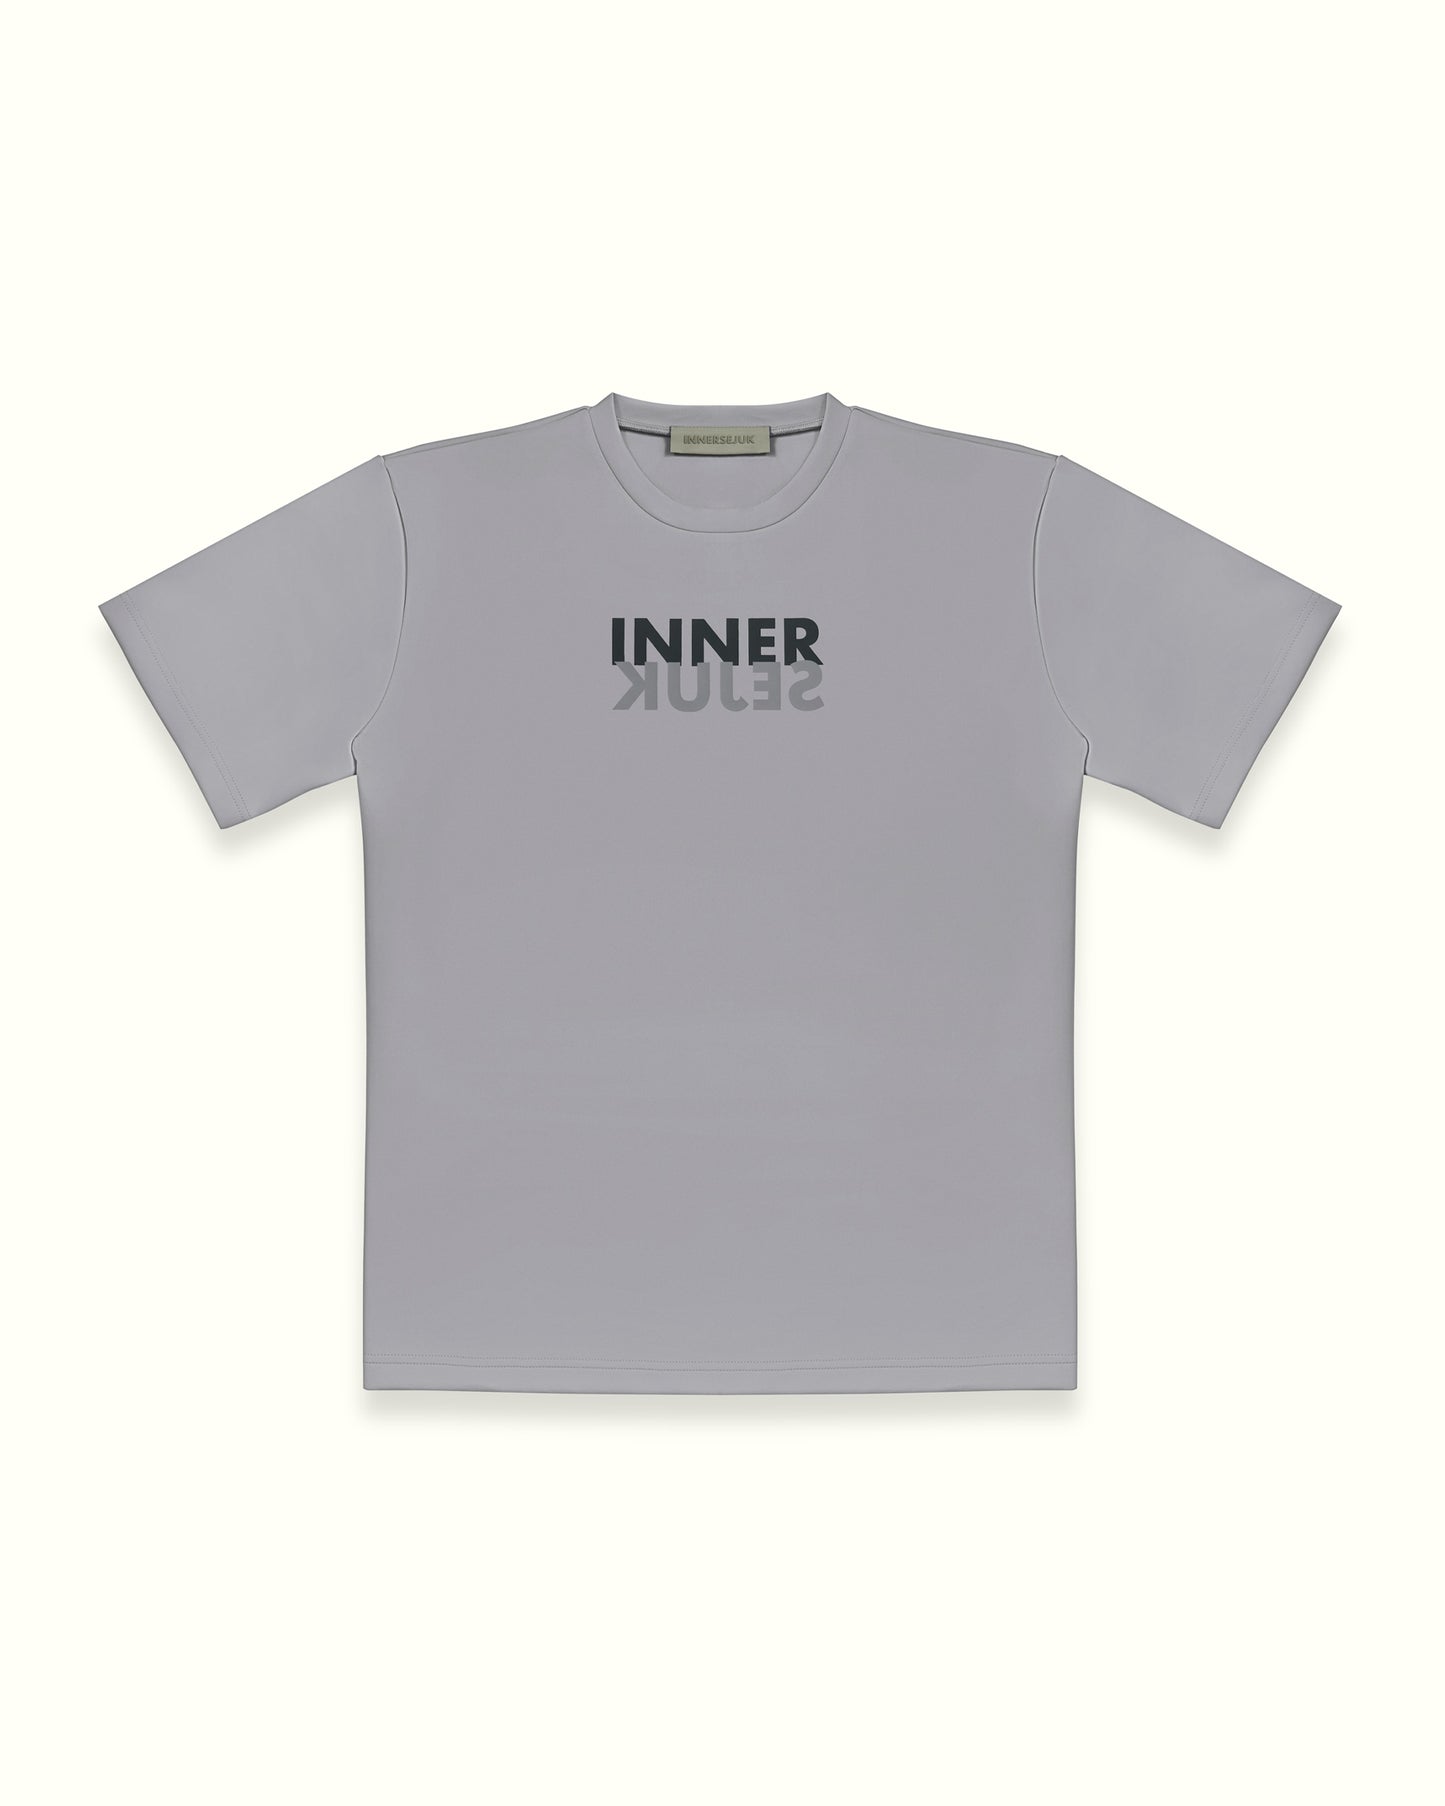 THE MIRROR IMAGE RELAXED TEE IN LIGHT GREY